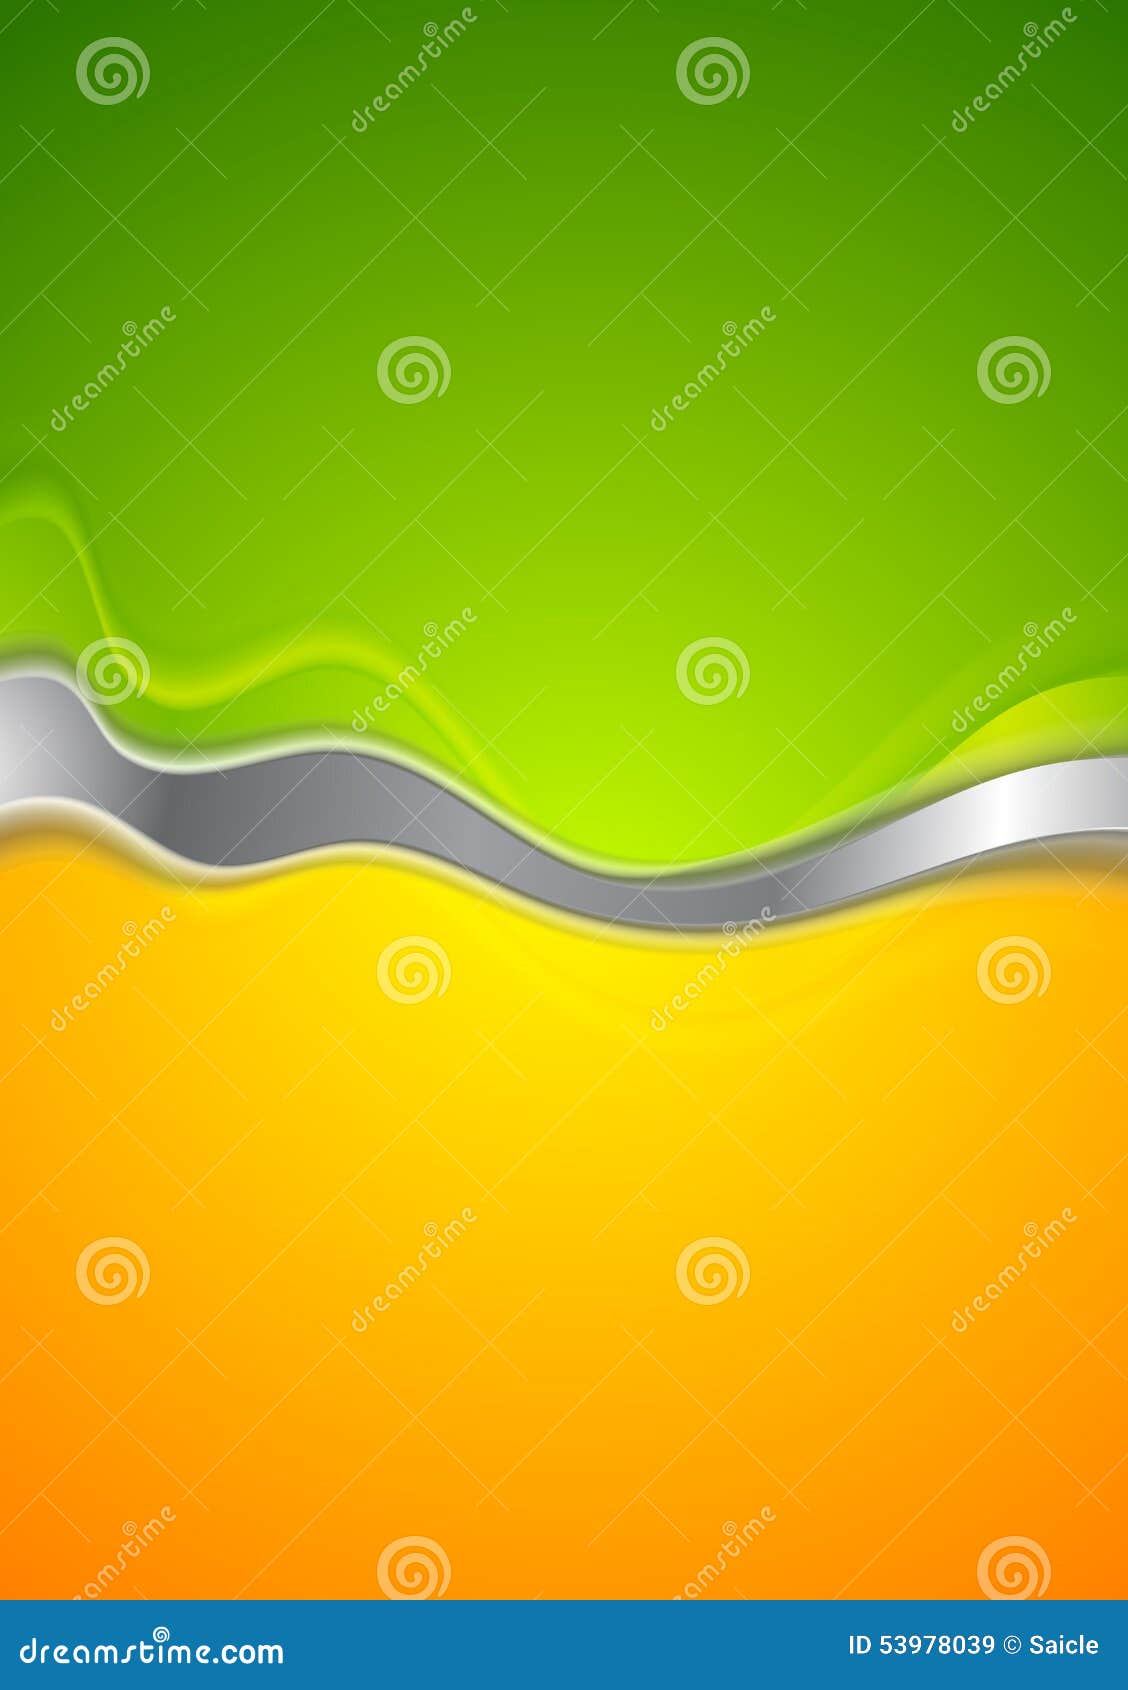 Abstract Green And Orange Background Illustration 53978039 - Megapixl